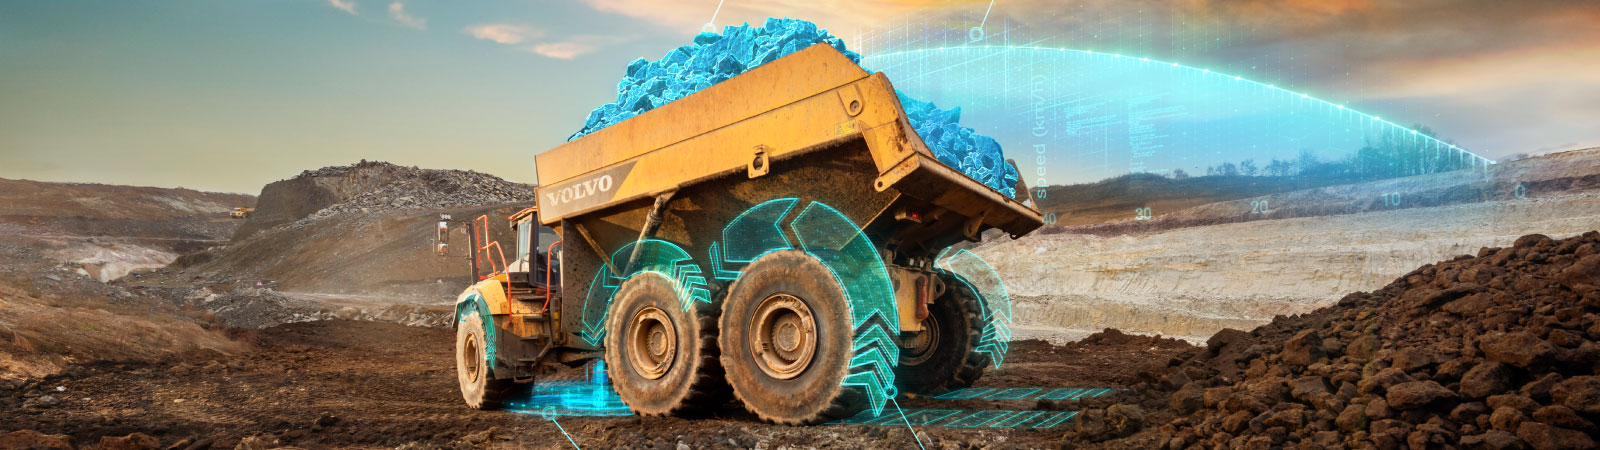 A mining dump truck is shown traveling over mounds of dirt. Blue movement lines are shown on the tires and in the dump bed.